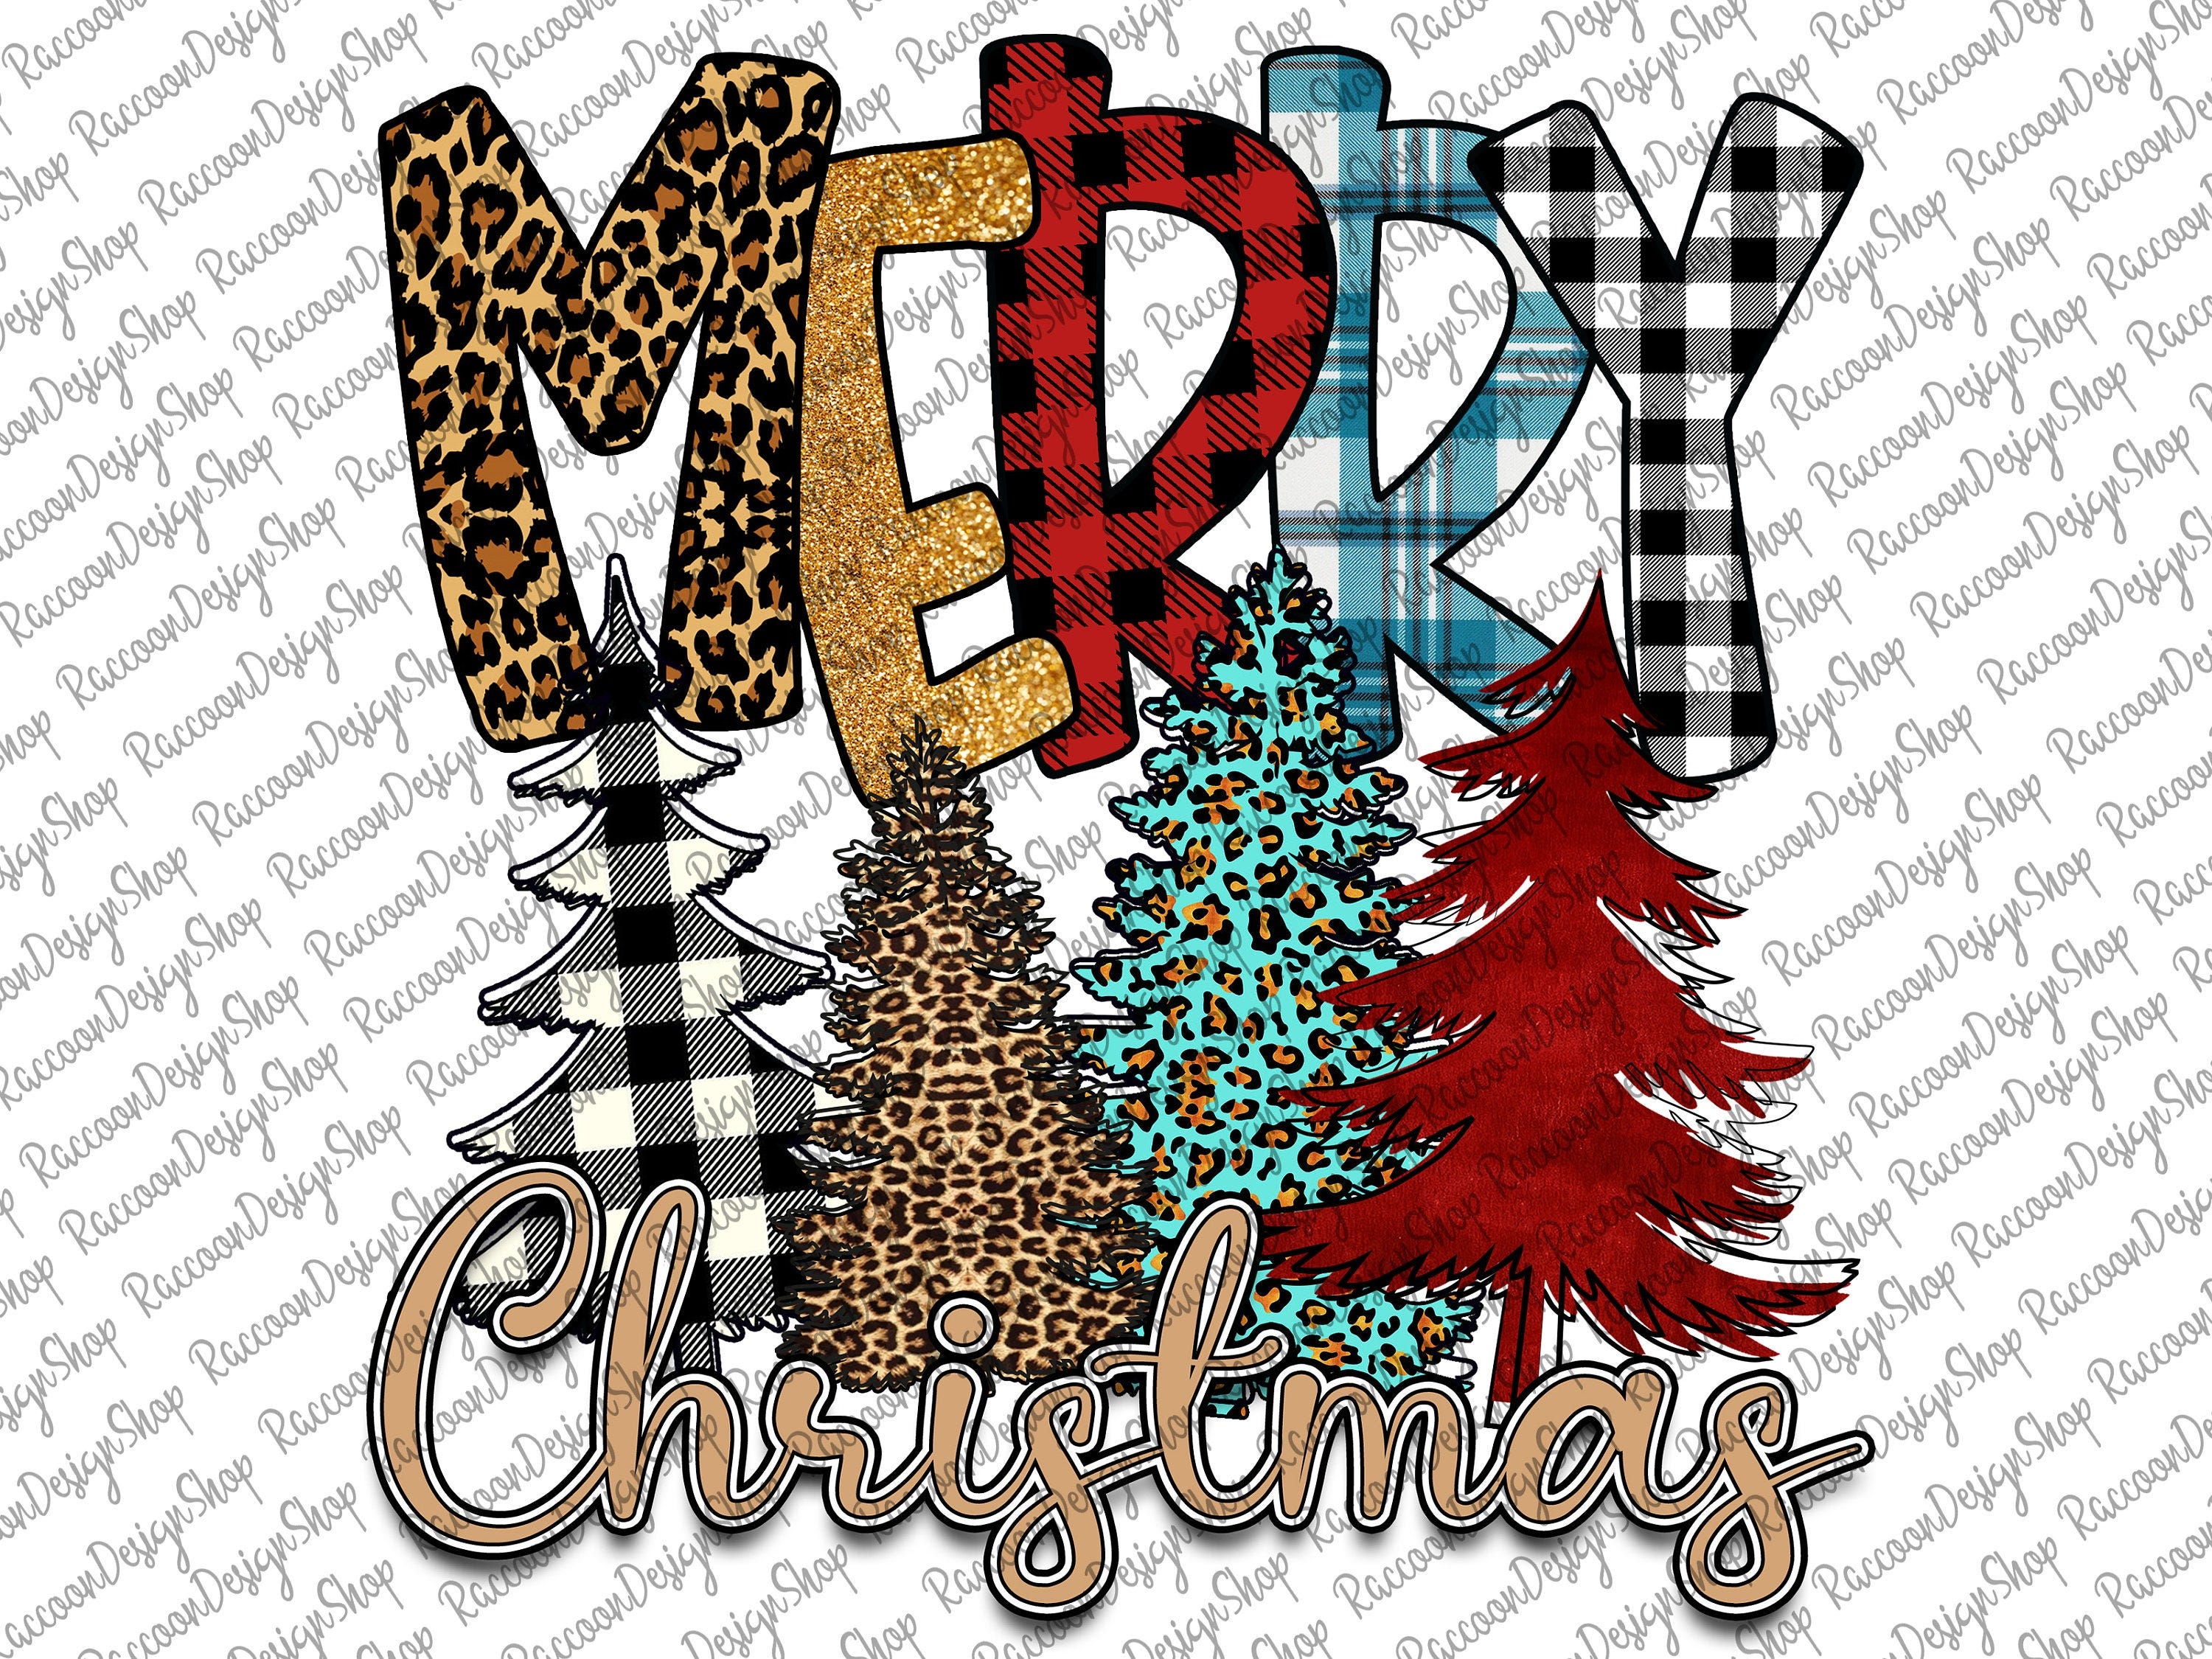 Merry Christmas Trees PNG, Sublimation Design, Digital Download, Sublimation, DTG Printing, Christmas Tree Cheetah, Xmas Png, Christmas Tree